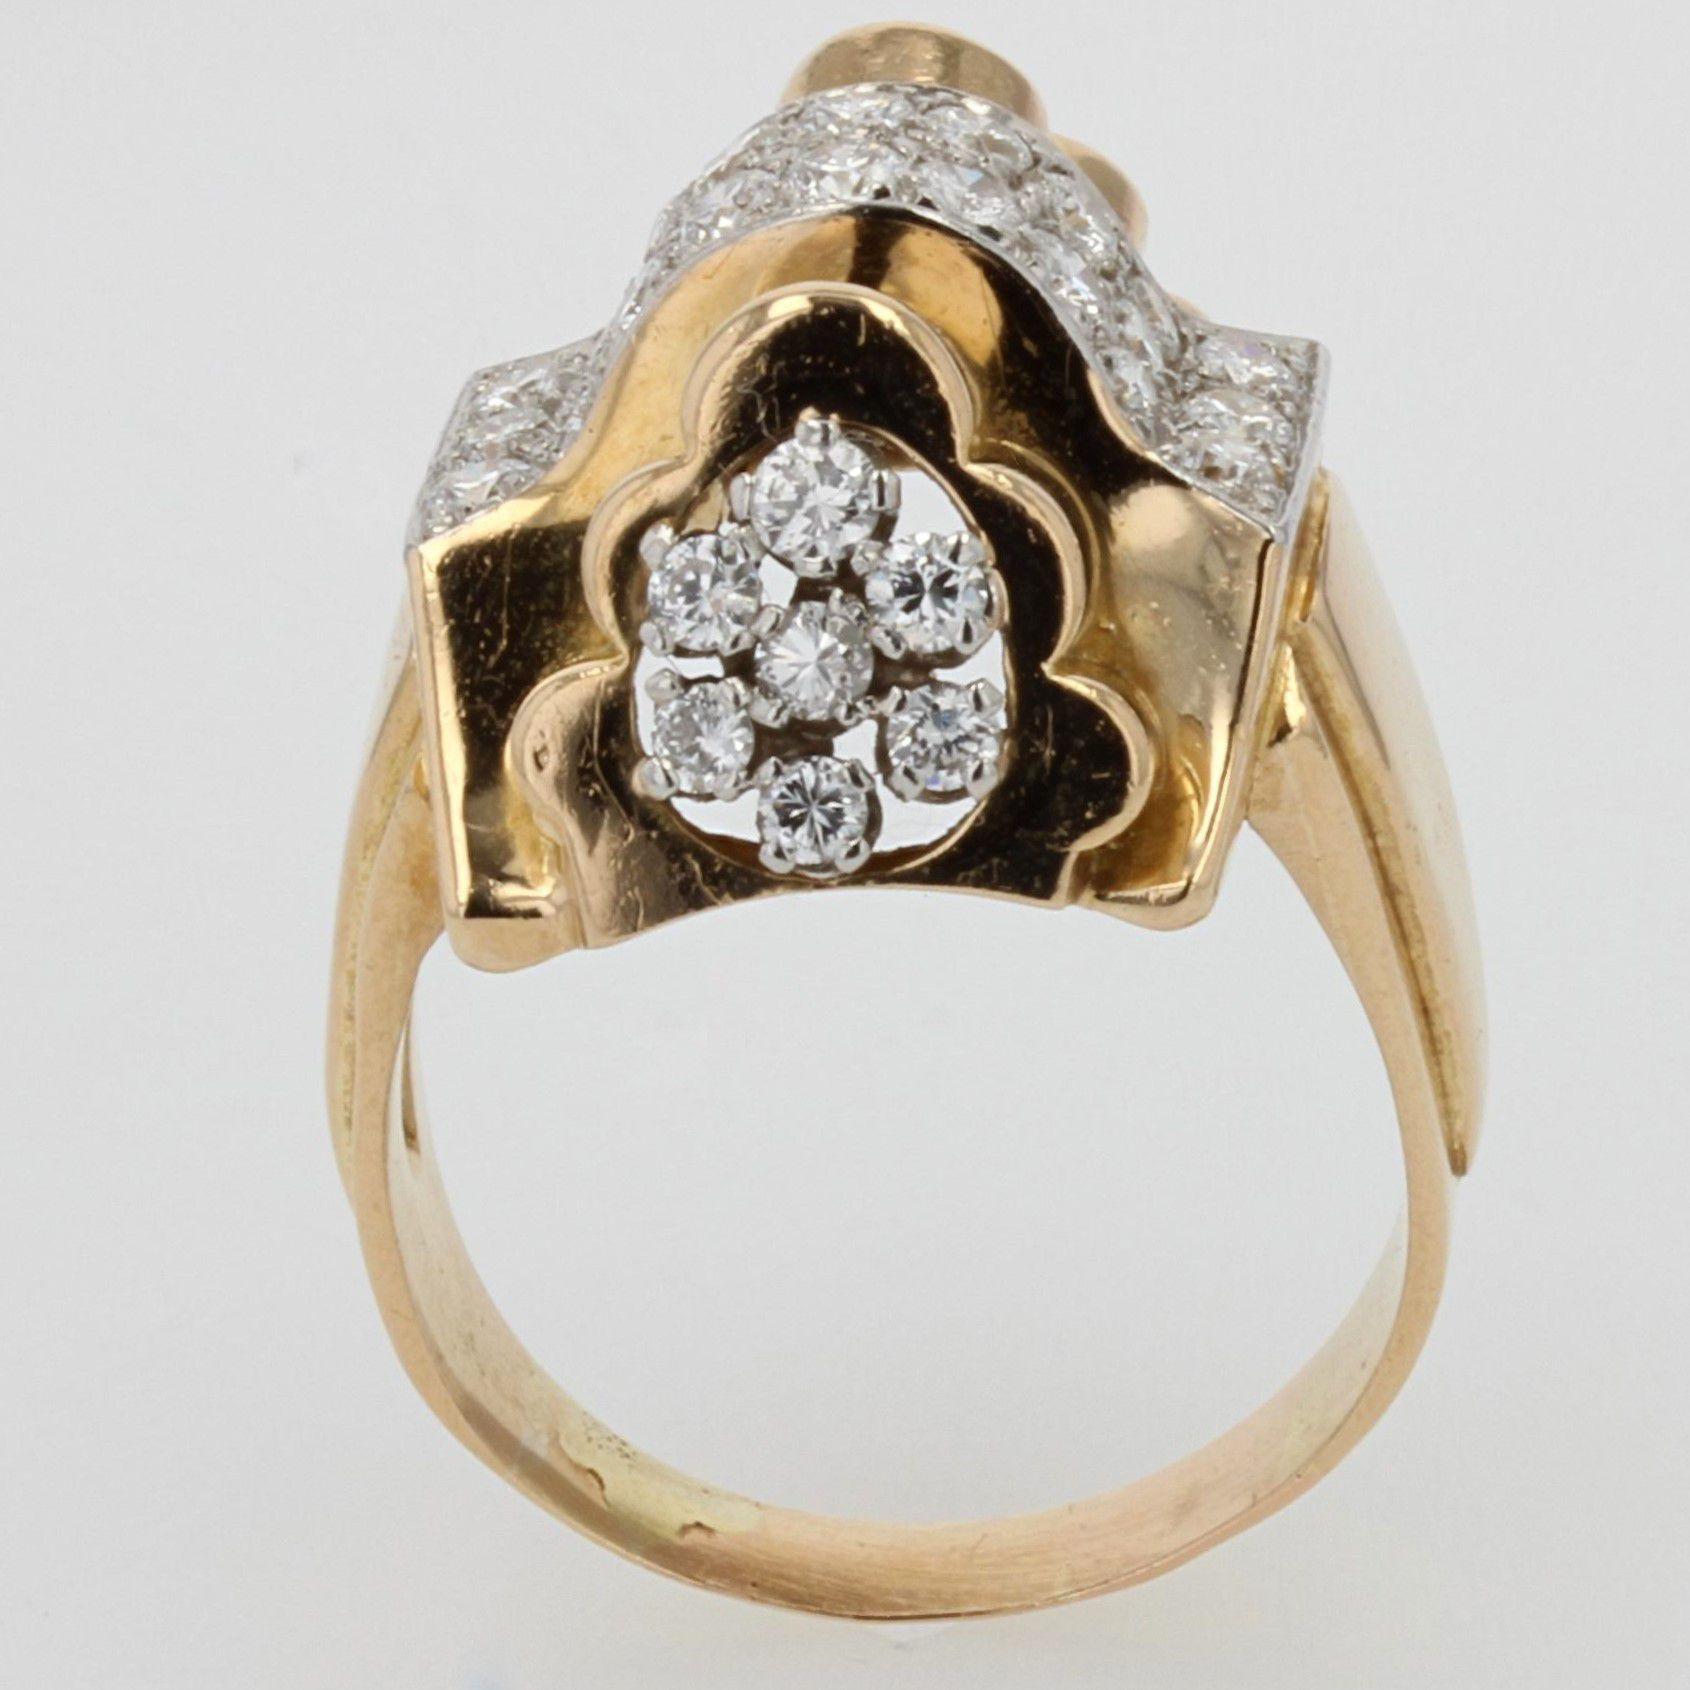 French 1940s Diamonds 18 Karat Yellow Gold Knot Tank Ring For Sale 3